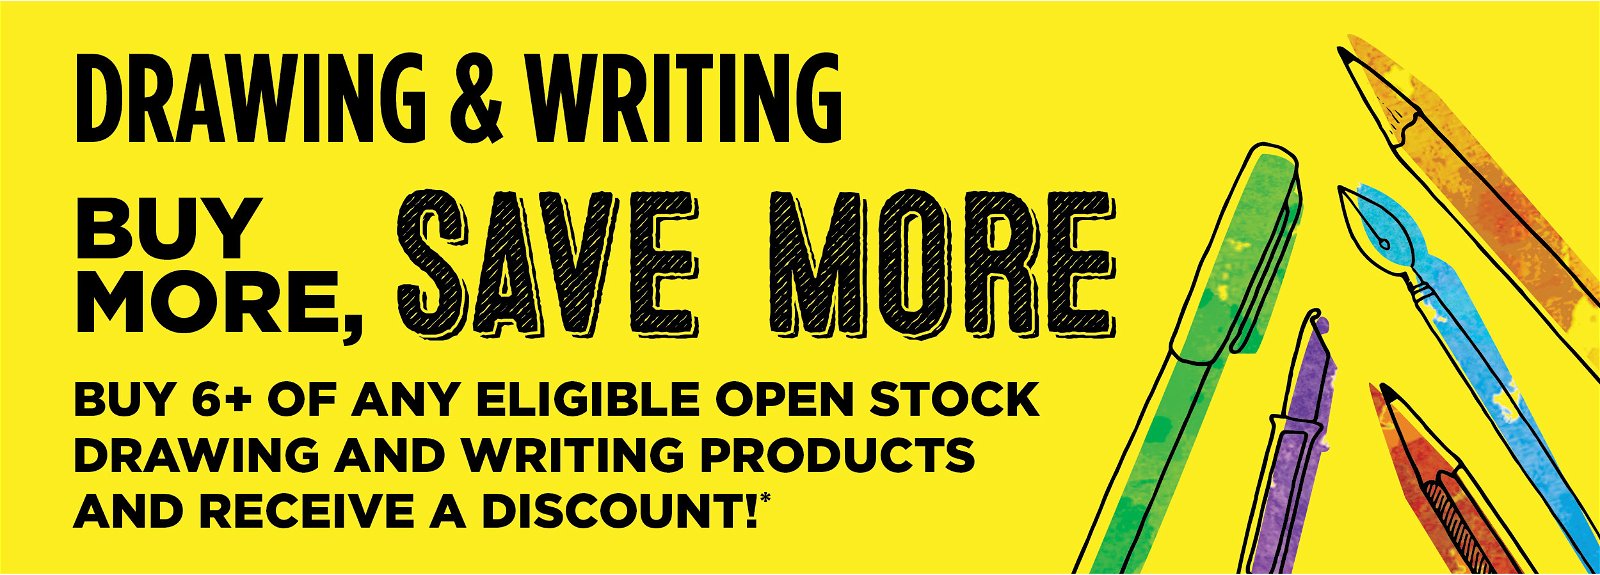 Buy More, Save More: Buy 6+ of any eligible open stock drawing and writing products and receive a discount!